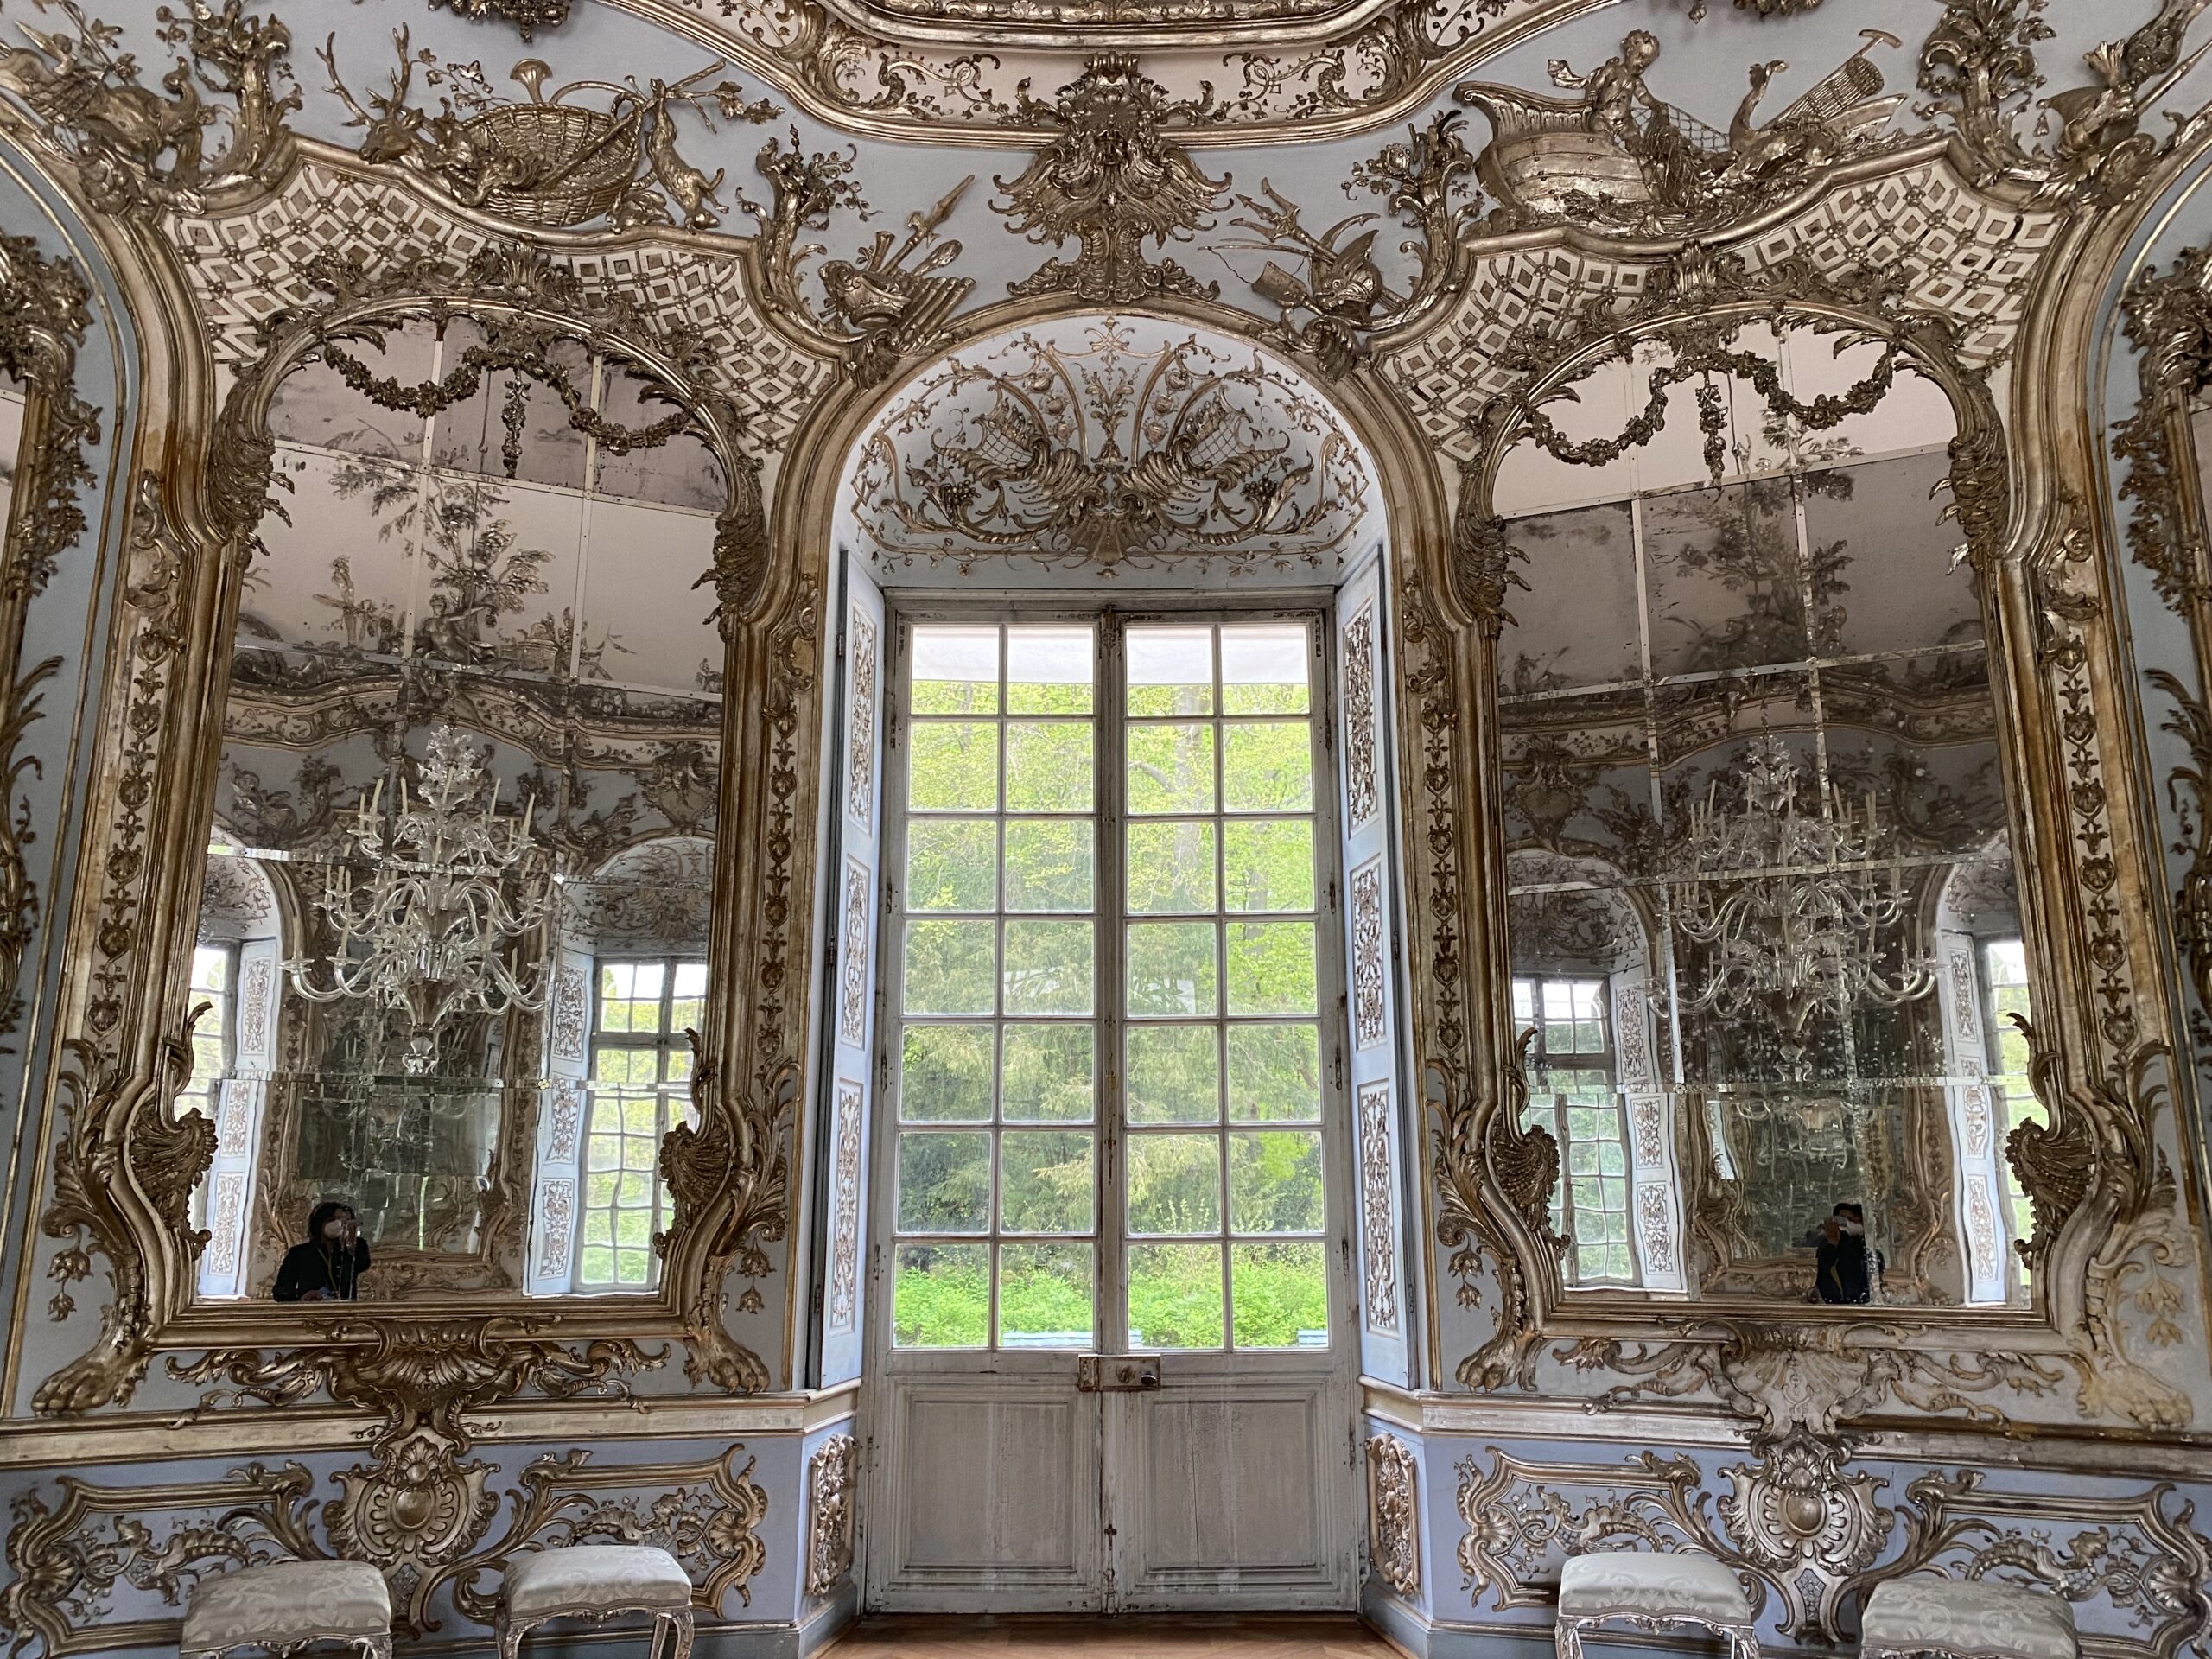 Elaborate wall and ceiling decorations in room of mirrors in a Munich Bavarian palace